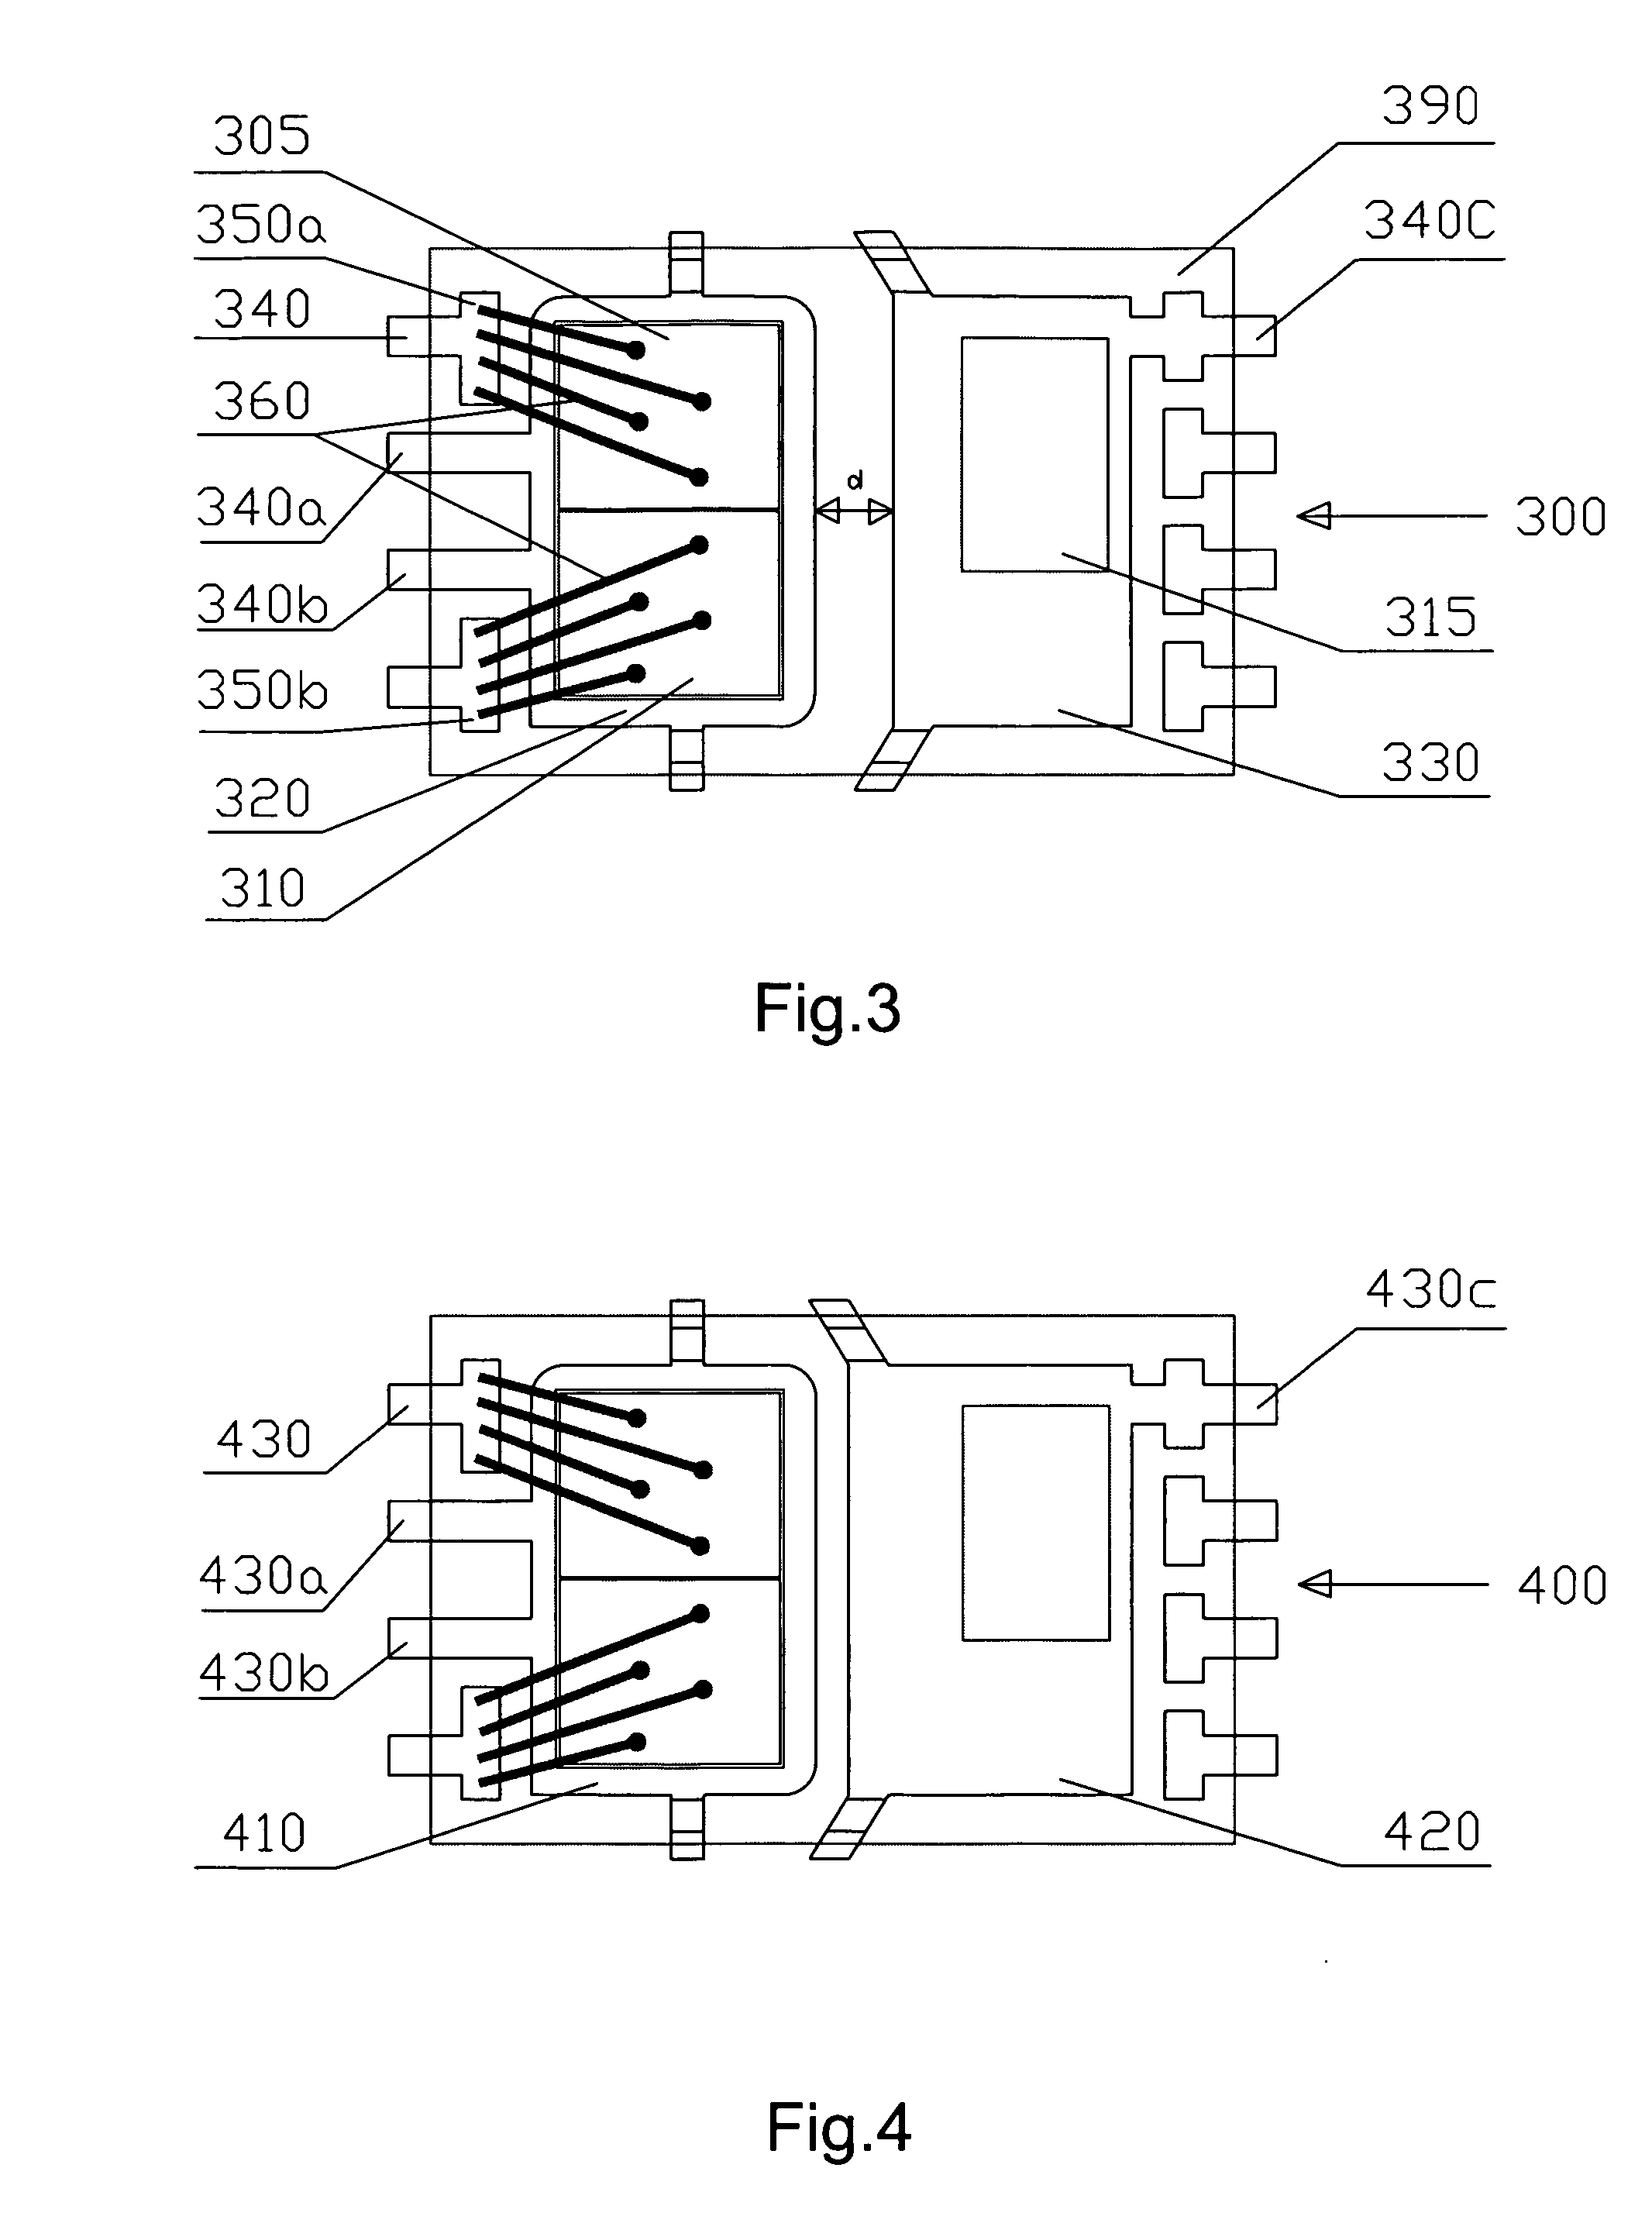 Semiconductor package having improved thermal performance